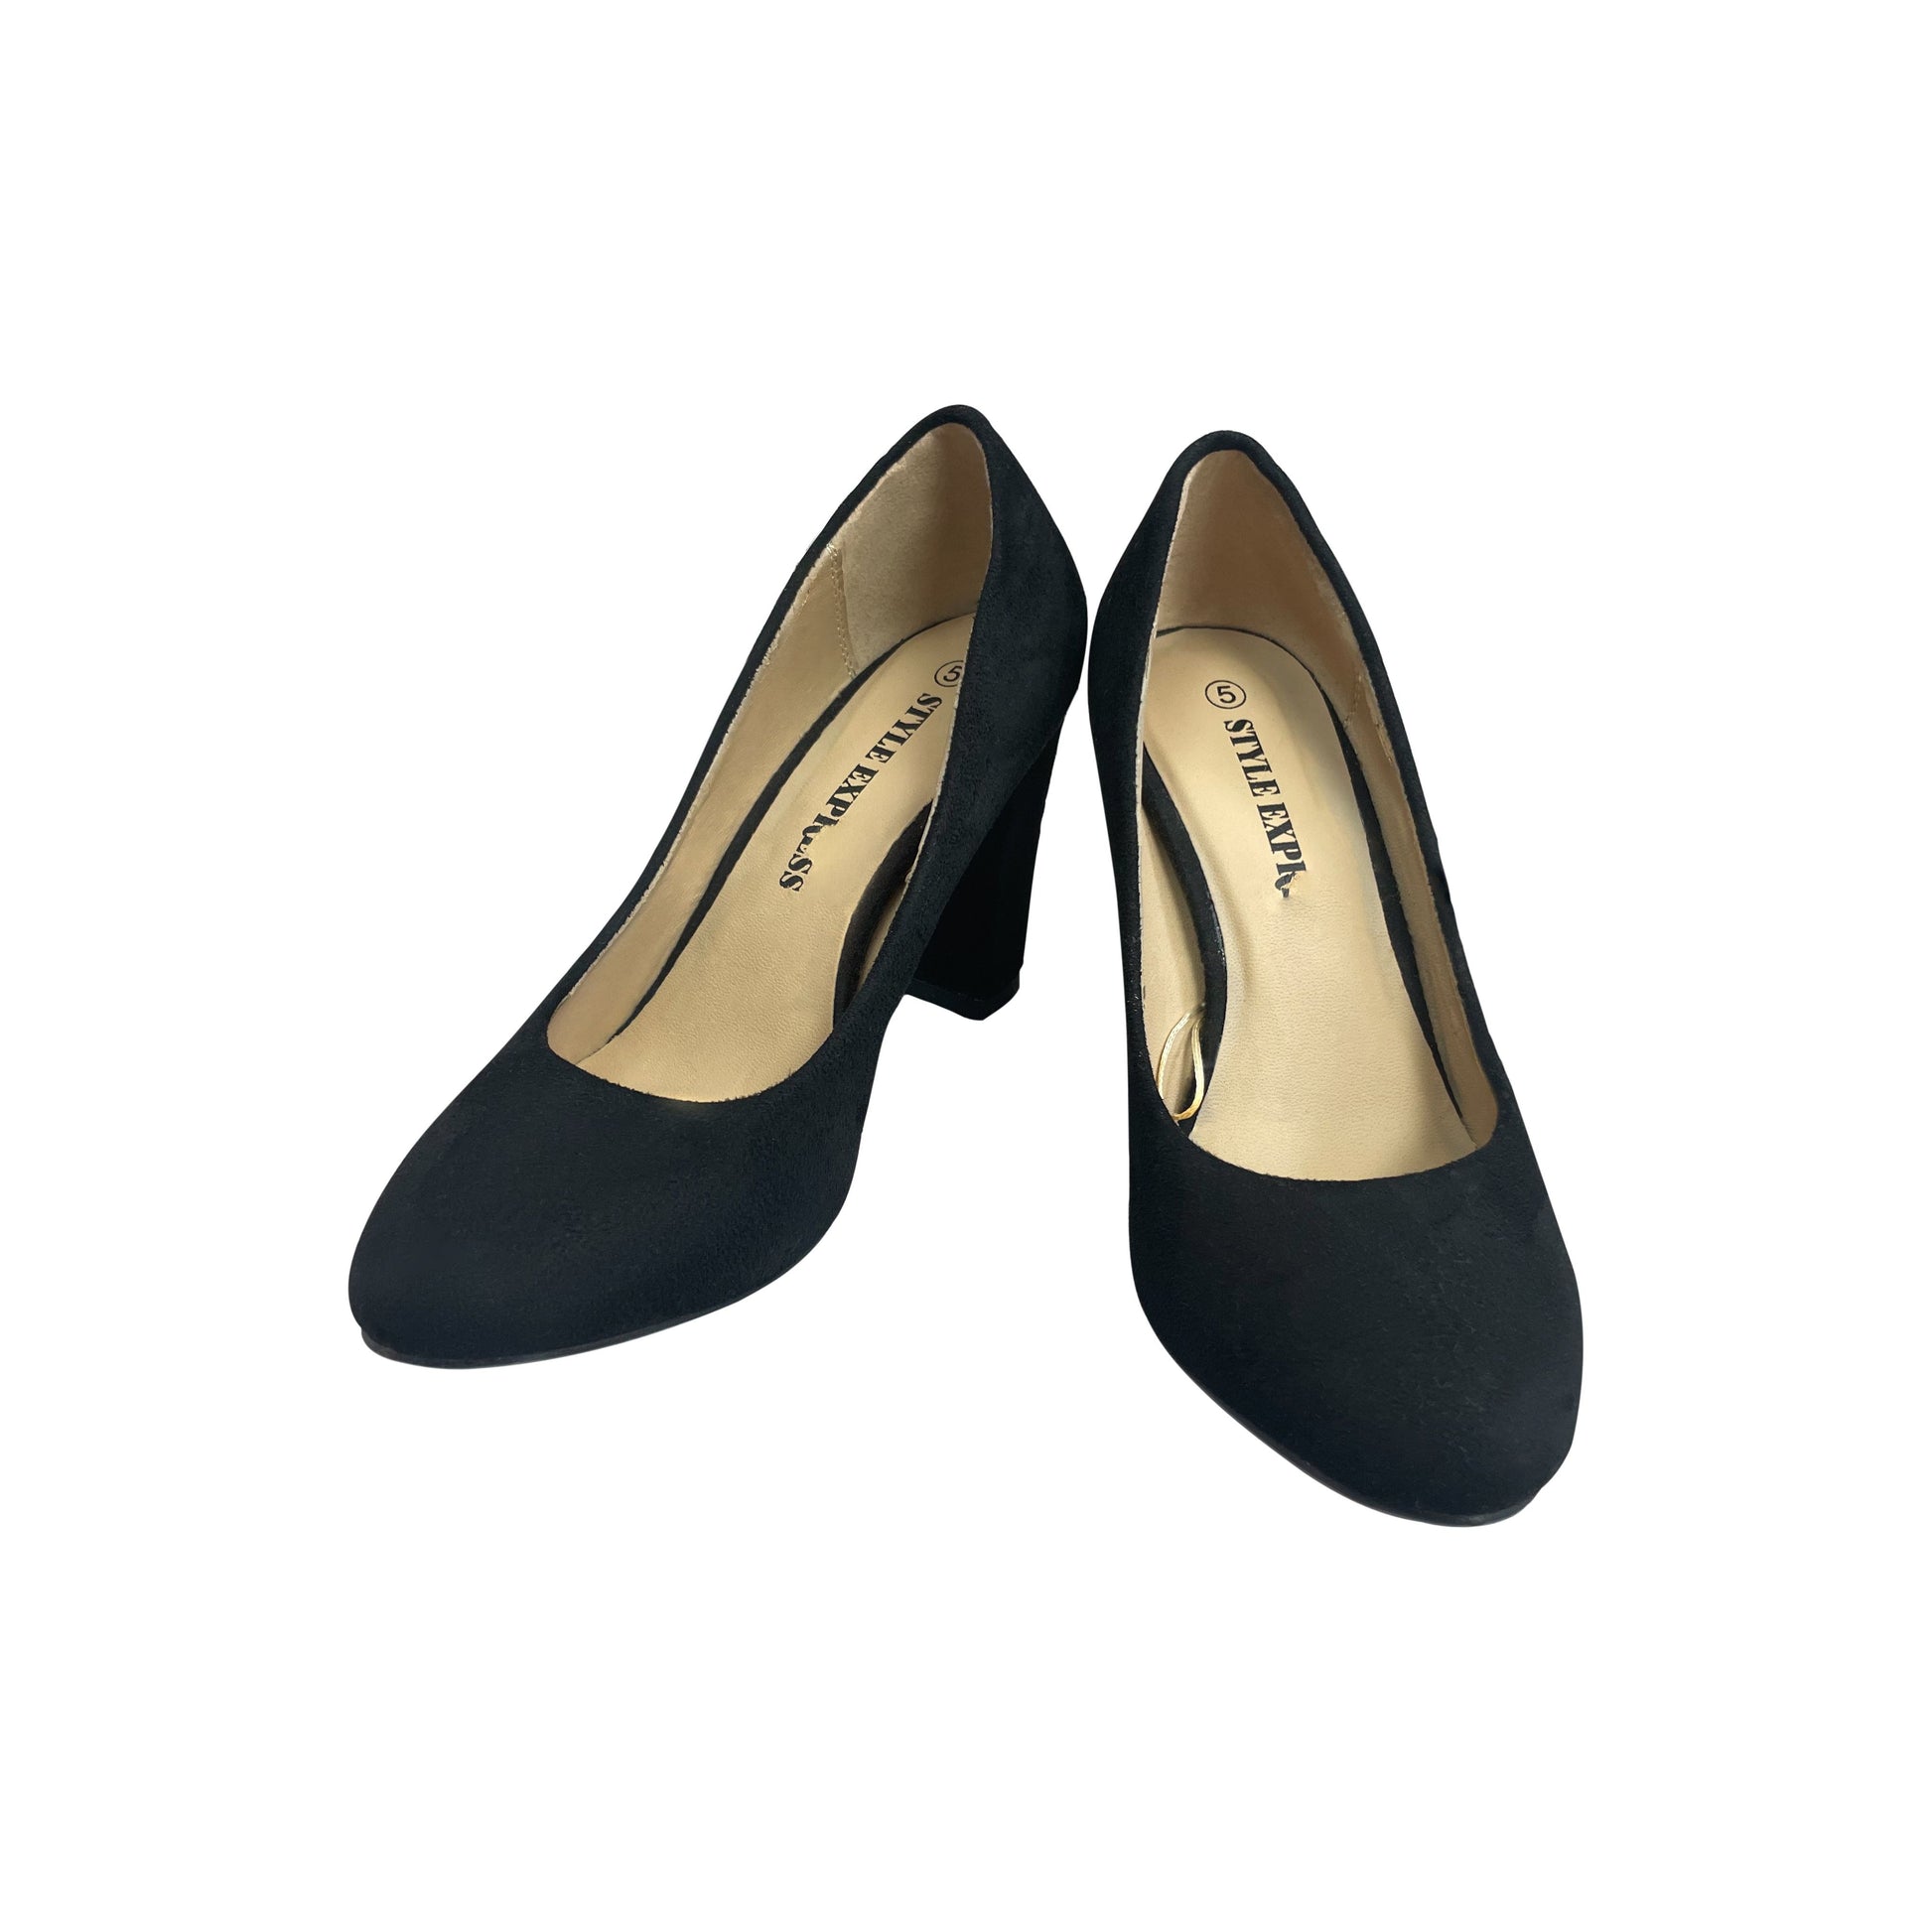 Style Experts black heels | size 5 or EU 35